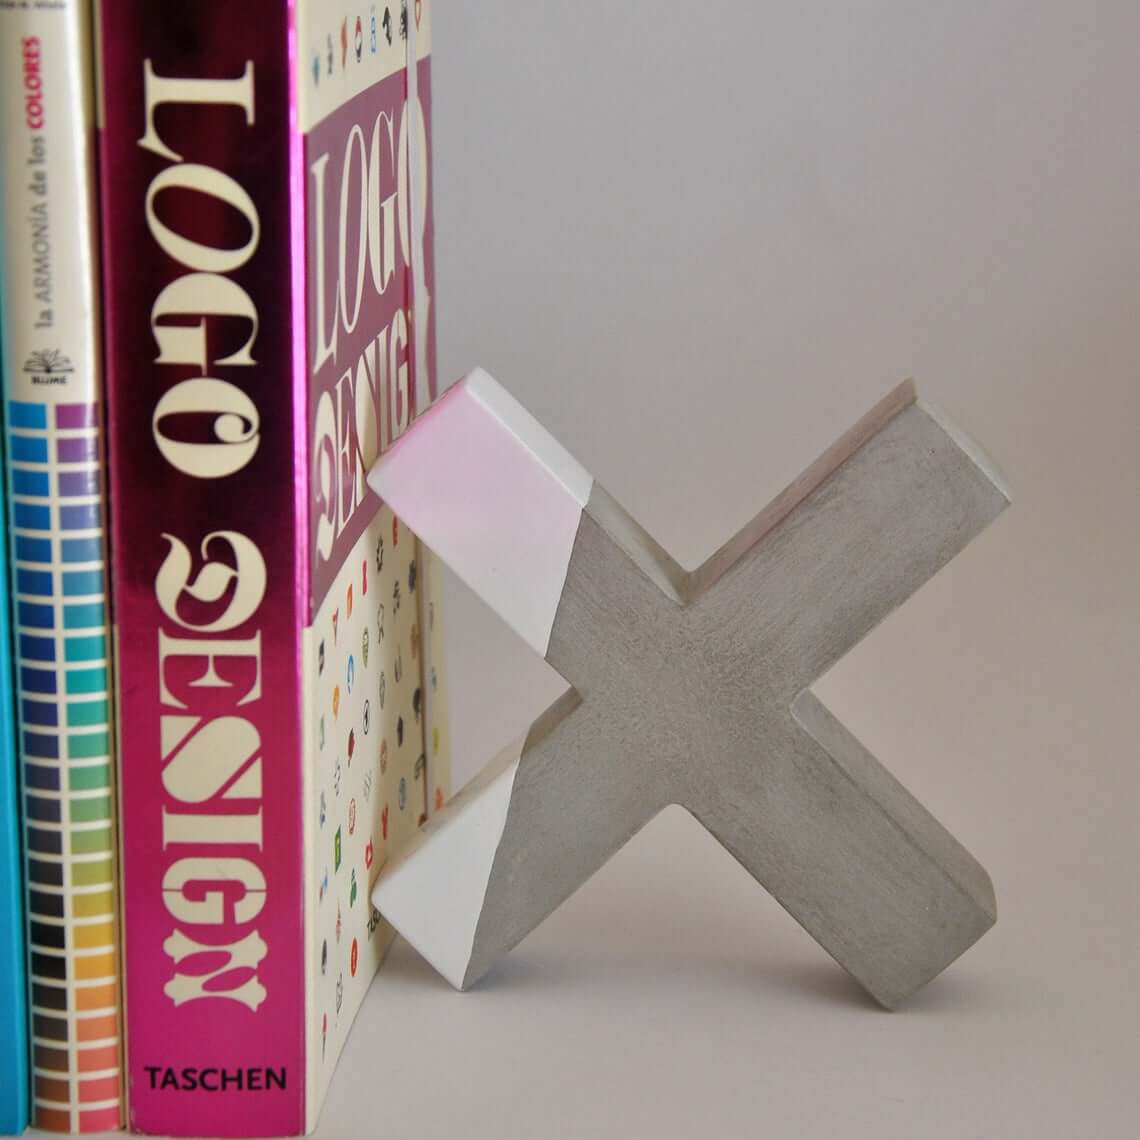 Concrete X-Shaped Bookends or Paperweight